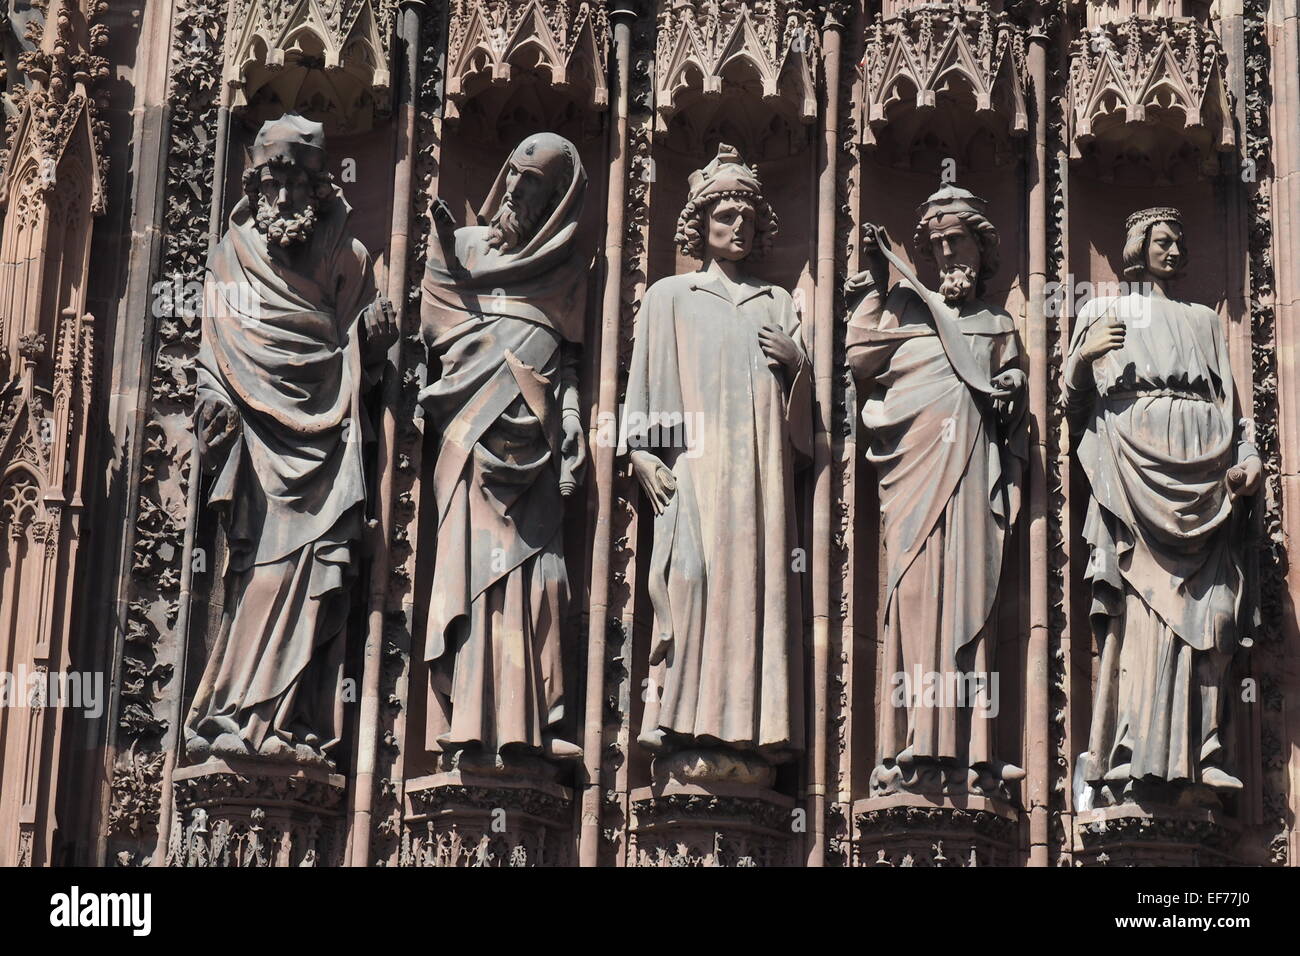 Statues of five Apostles on the front facade of Strasbourg Cathedral. Stock Photo